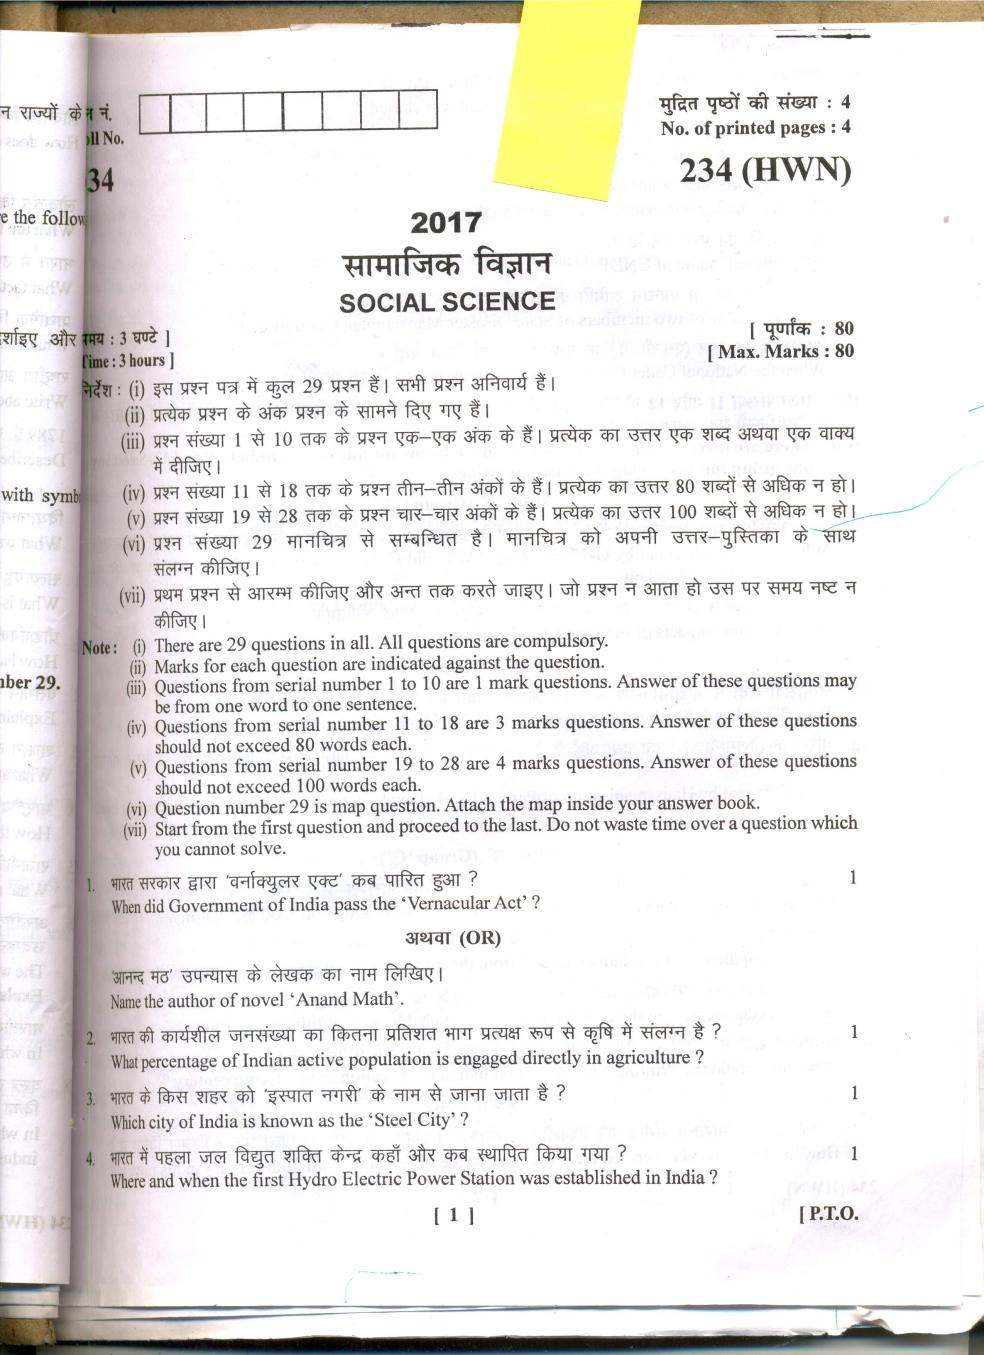 Uttarakhand Board Class 10 Question Paper 2017 for Social Science-2 - Page 1